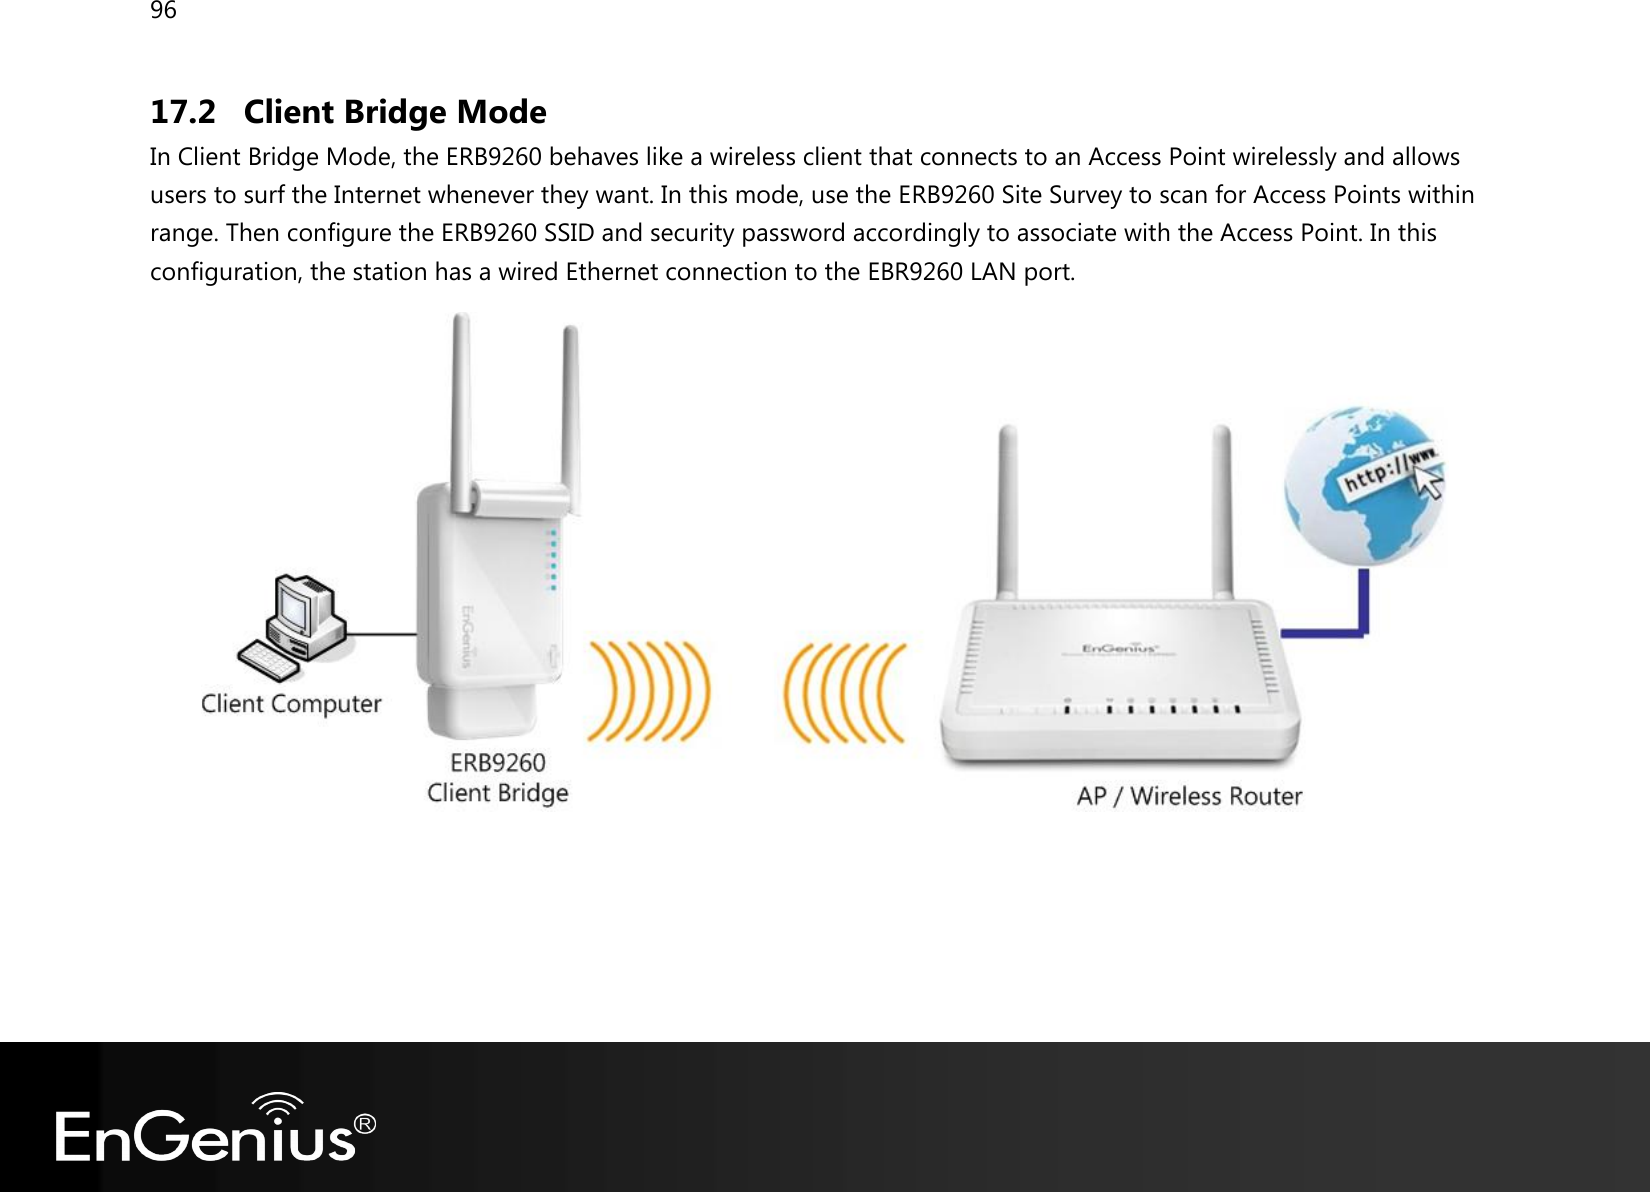 96  17.2 Client Bridge Mode In Client Bridge Mode, the ERB9260 behaves like a wireless client that connects to an Access Point wirelessly and allows users to surf the Internet whenever they want. In this mode, use the ERB9260 Site Survey to scan for Access Points within range. Then configure the ERB9260 SSID and security password accordingly to associate with the Access Point. In this configuration, the station has a wired Ethernet connection to the EBR9260 LAN port.   